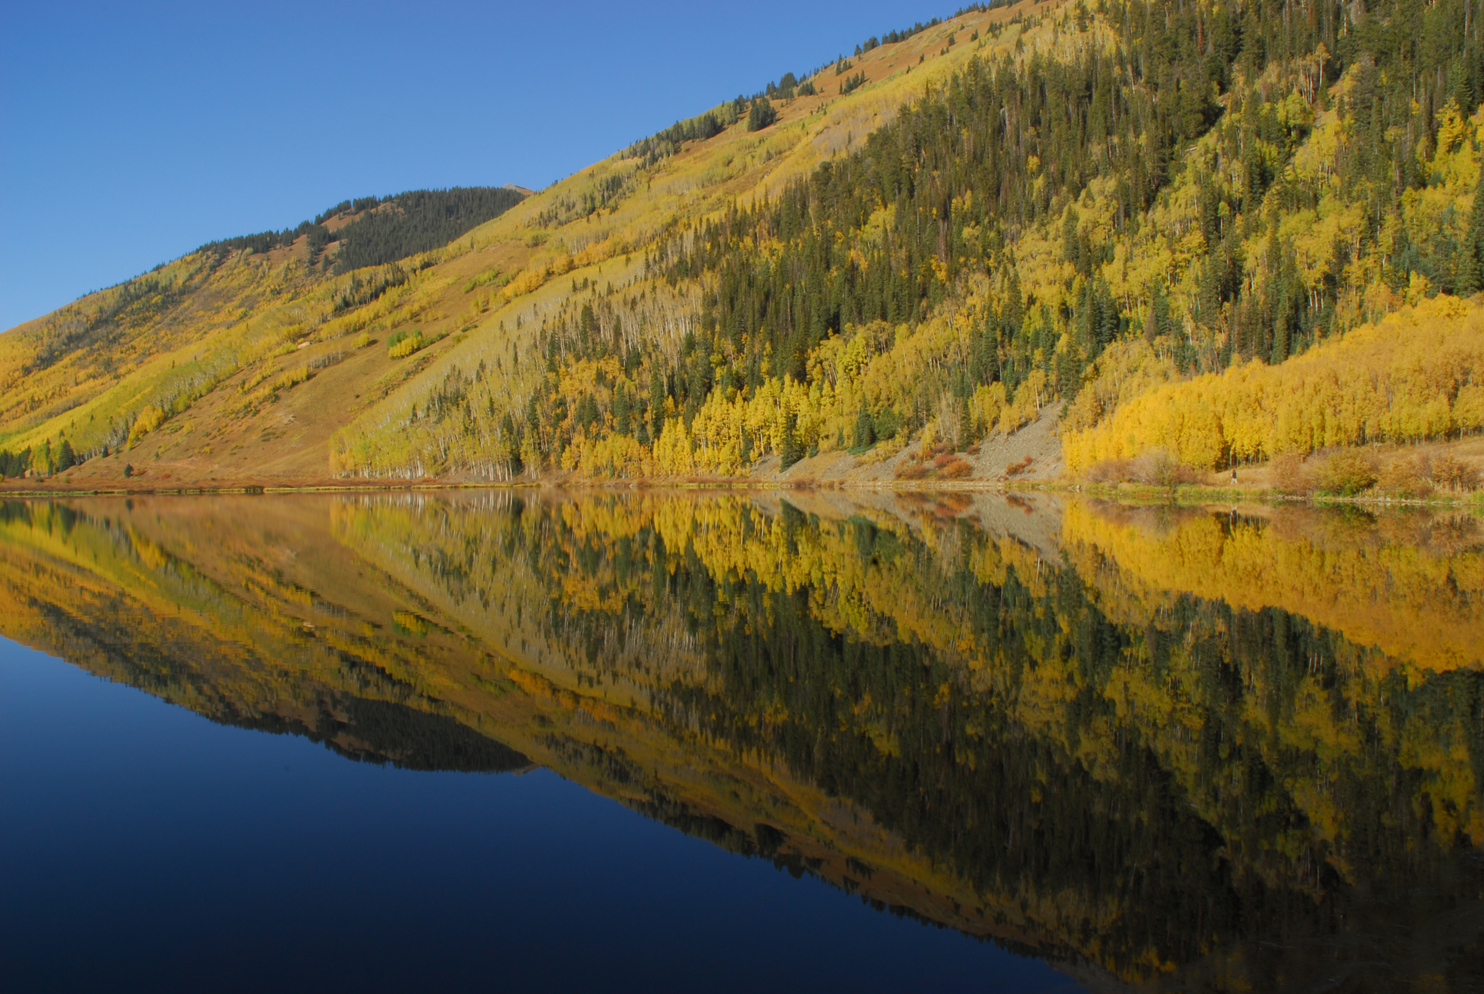 Fall colors reflection  -  Crystal Lake, Uncompahgre National Forest, Colorado  